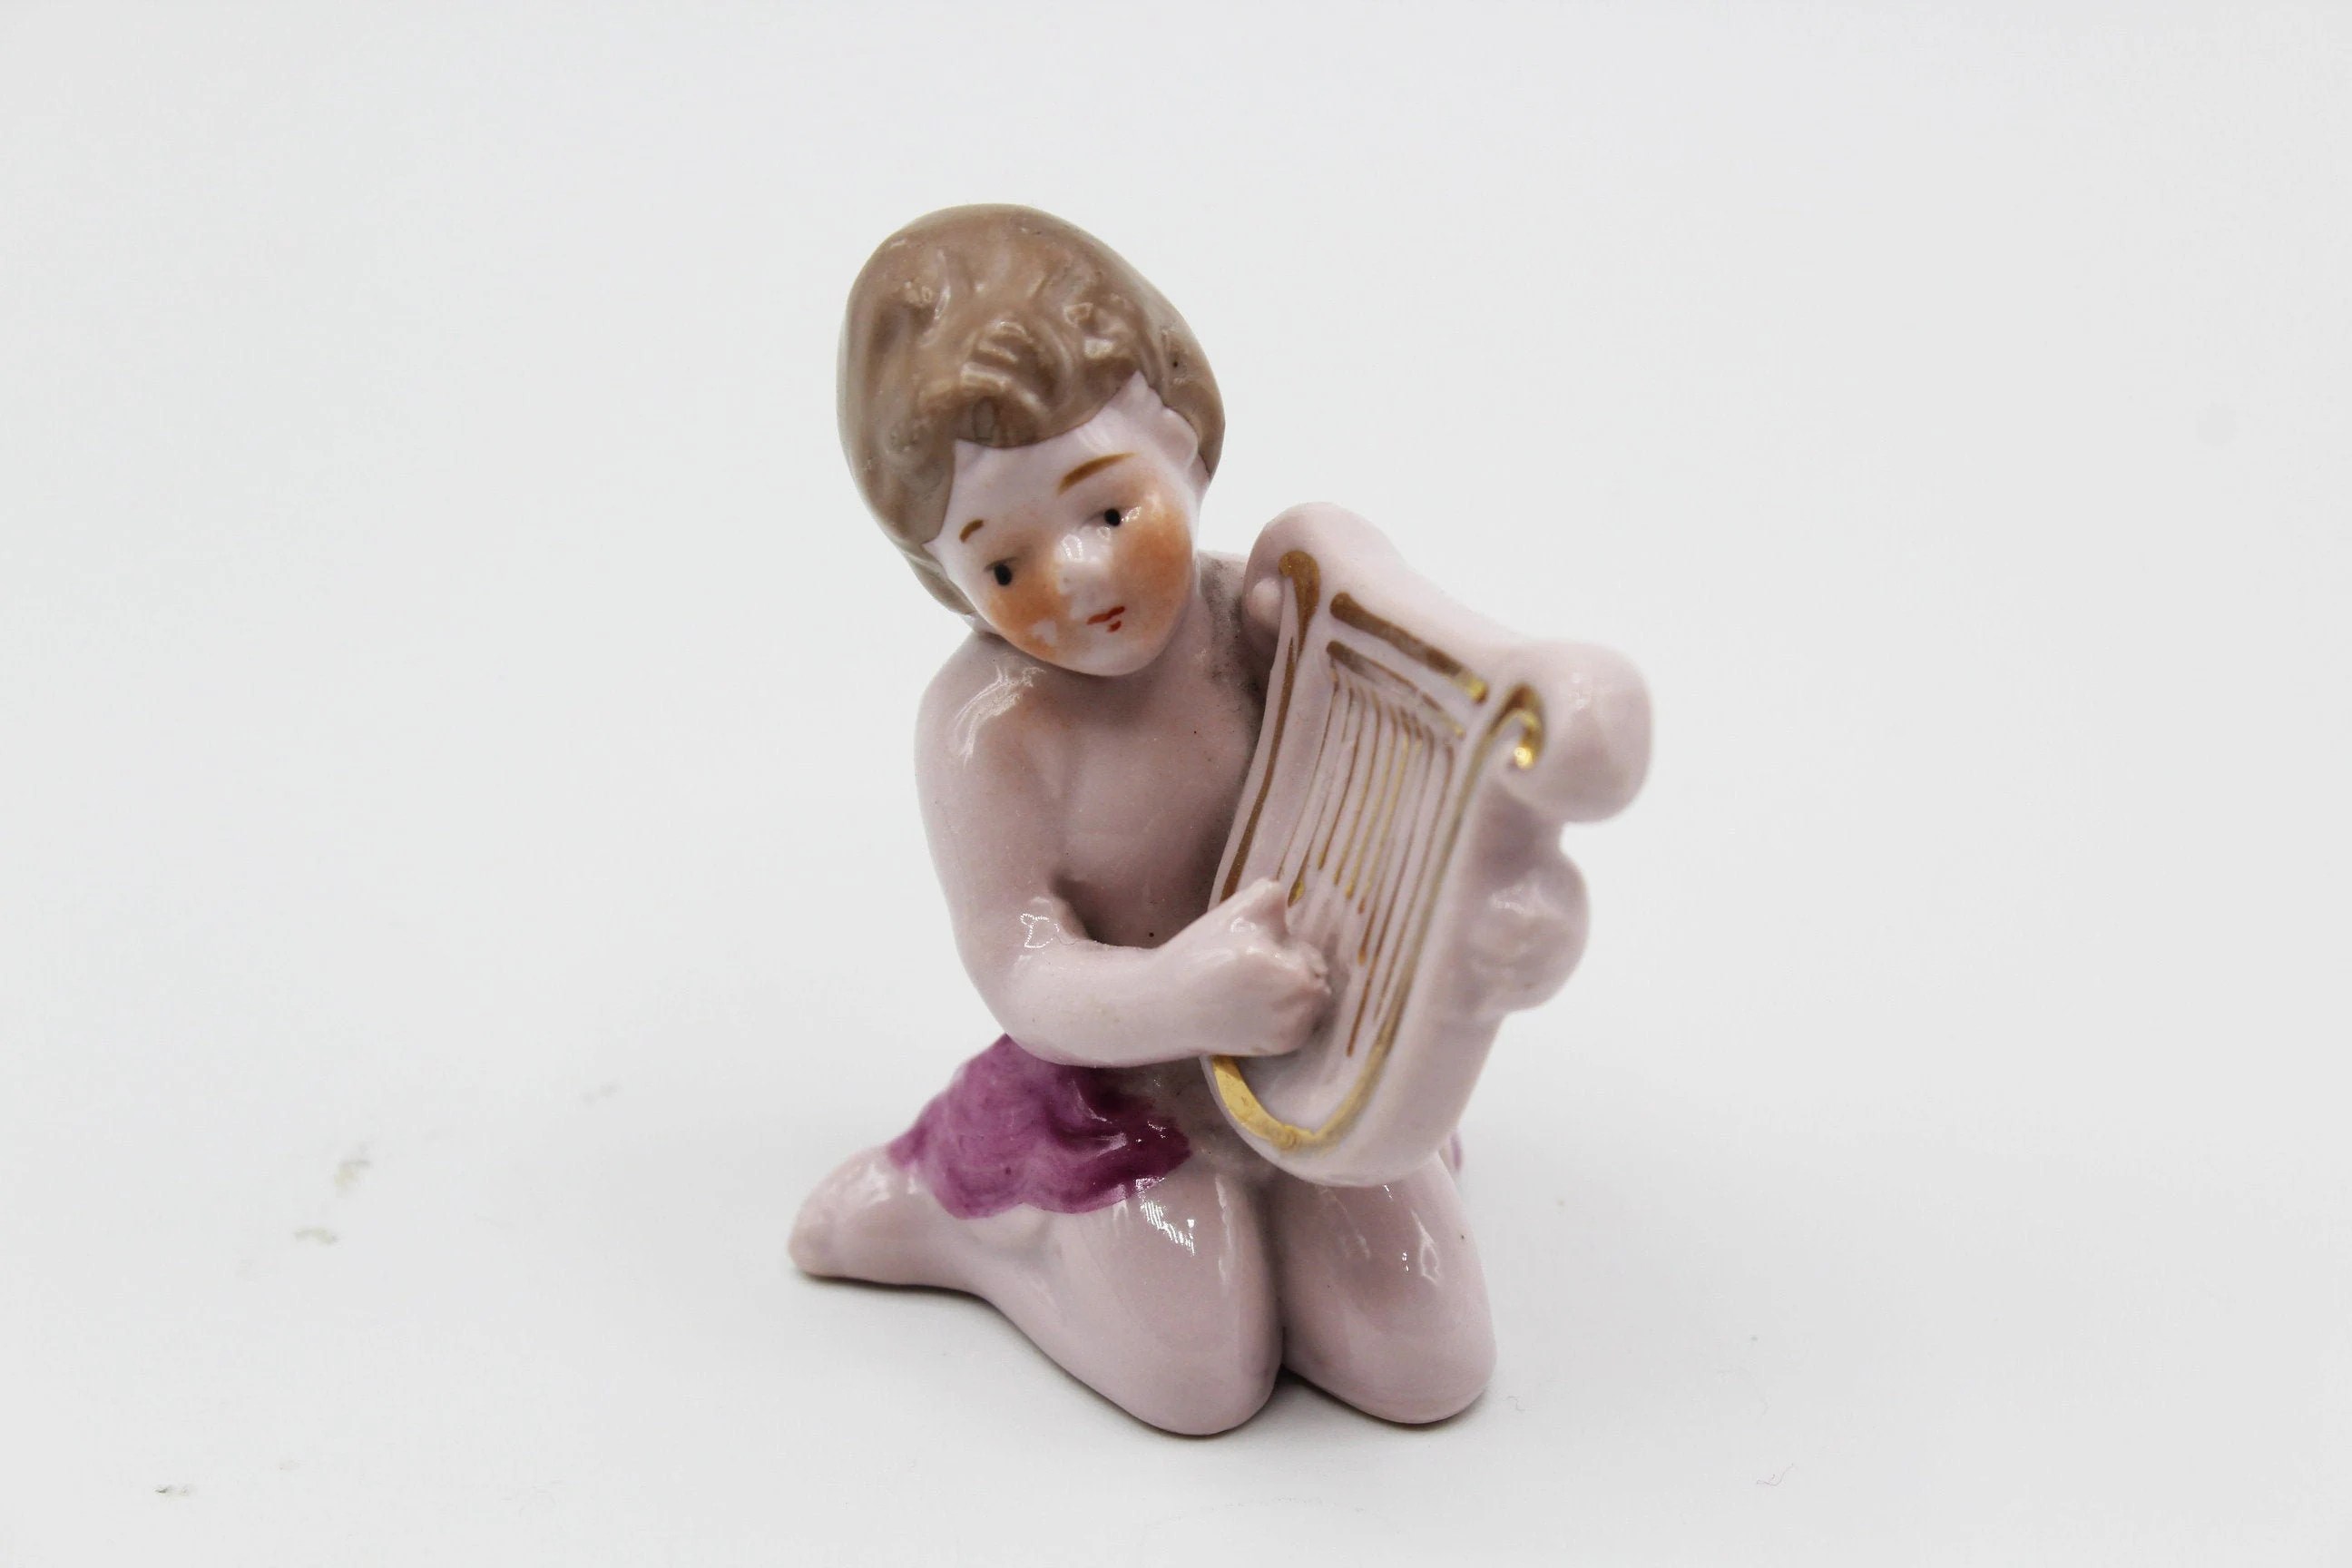 Porcelain Figurine - Boy with Lyre Harp - Vintage Miniature from Japan at Whispering City RVA